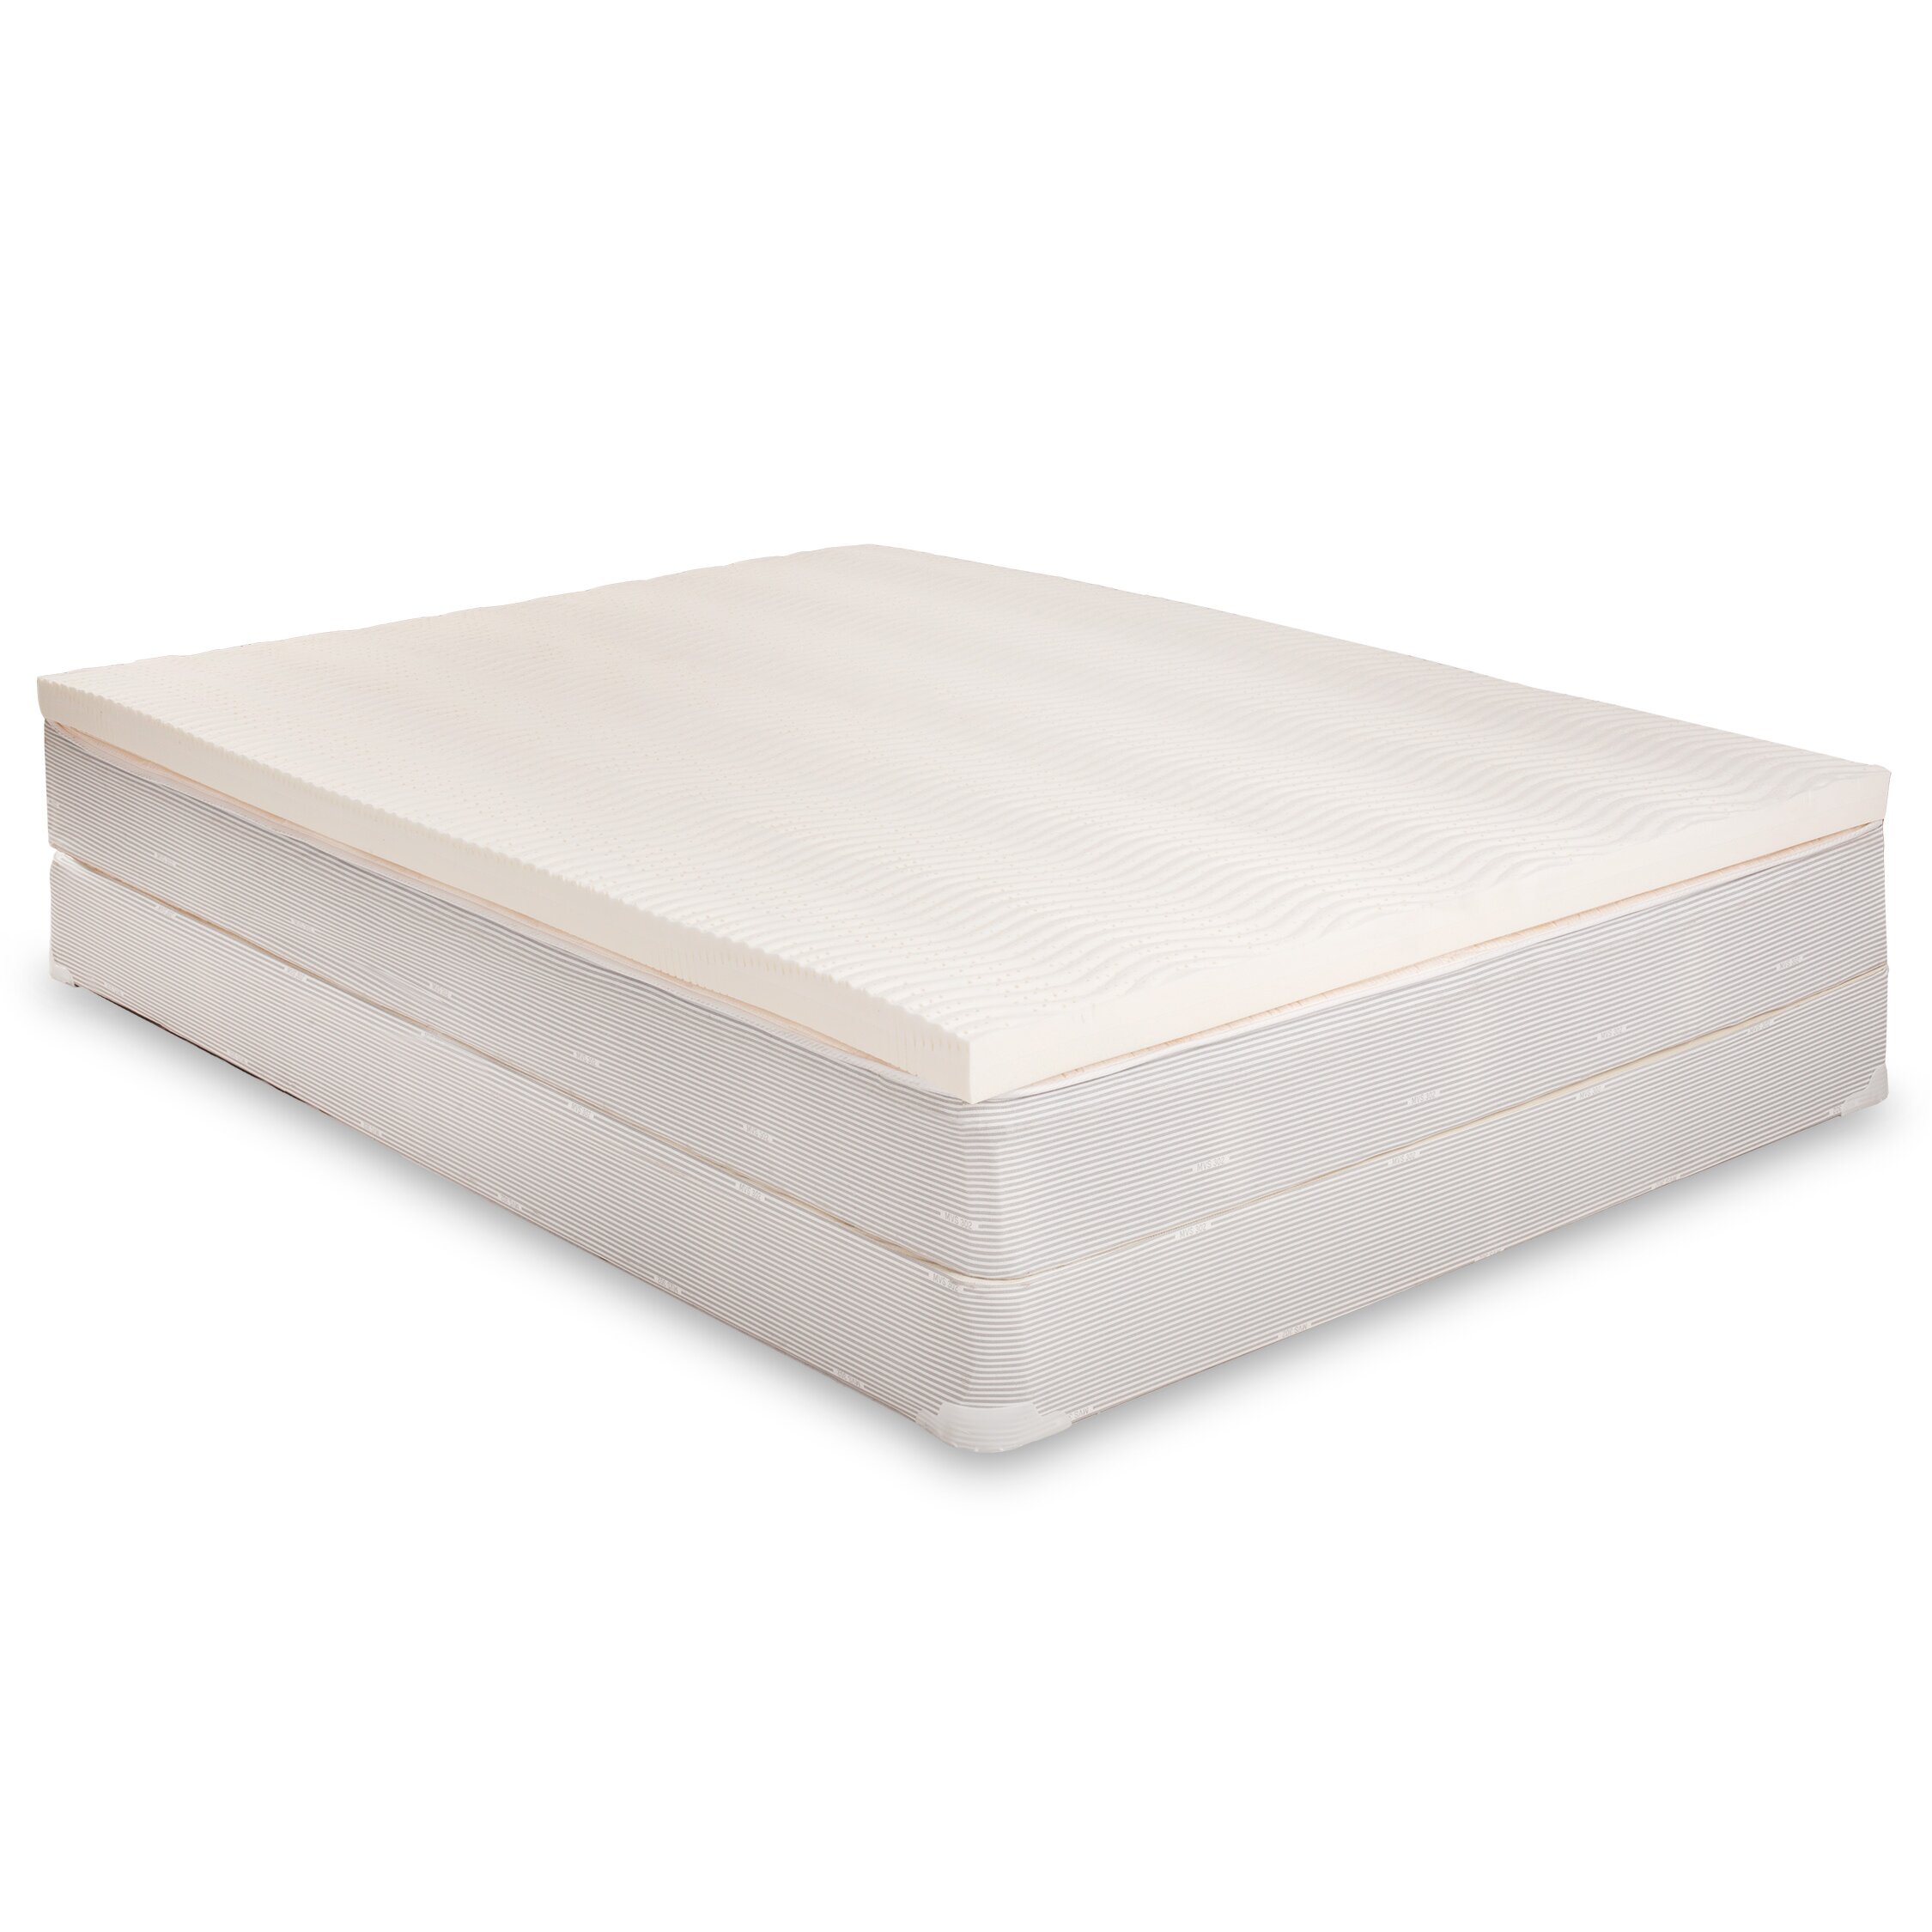 Latex Mattress Toppers Reviews 61